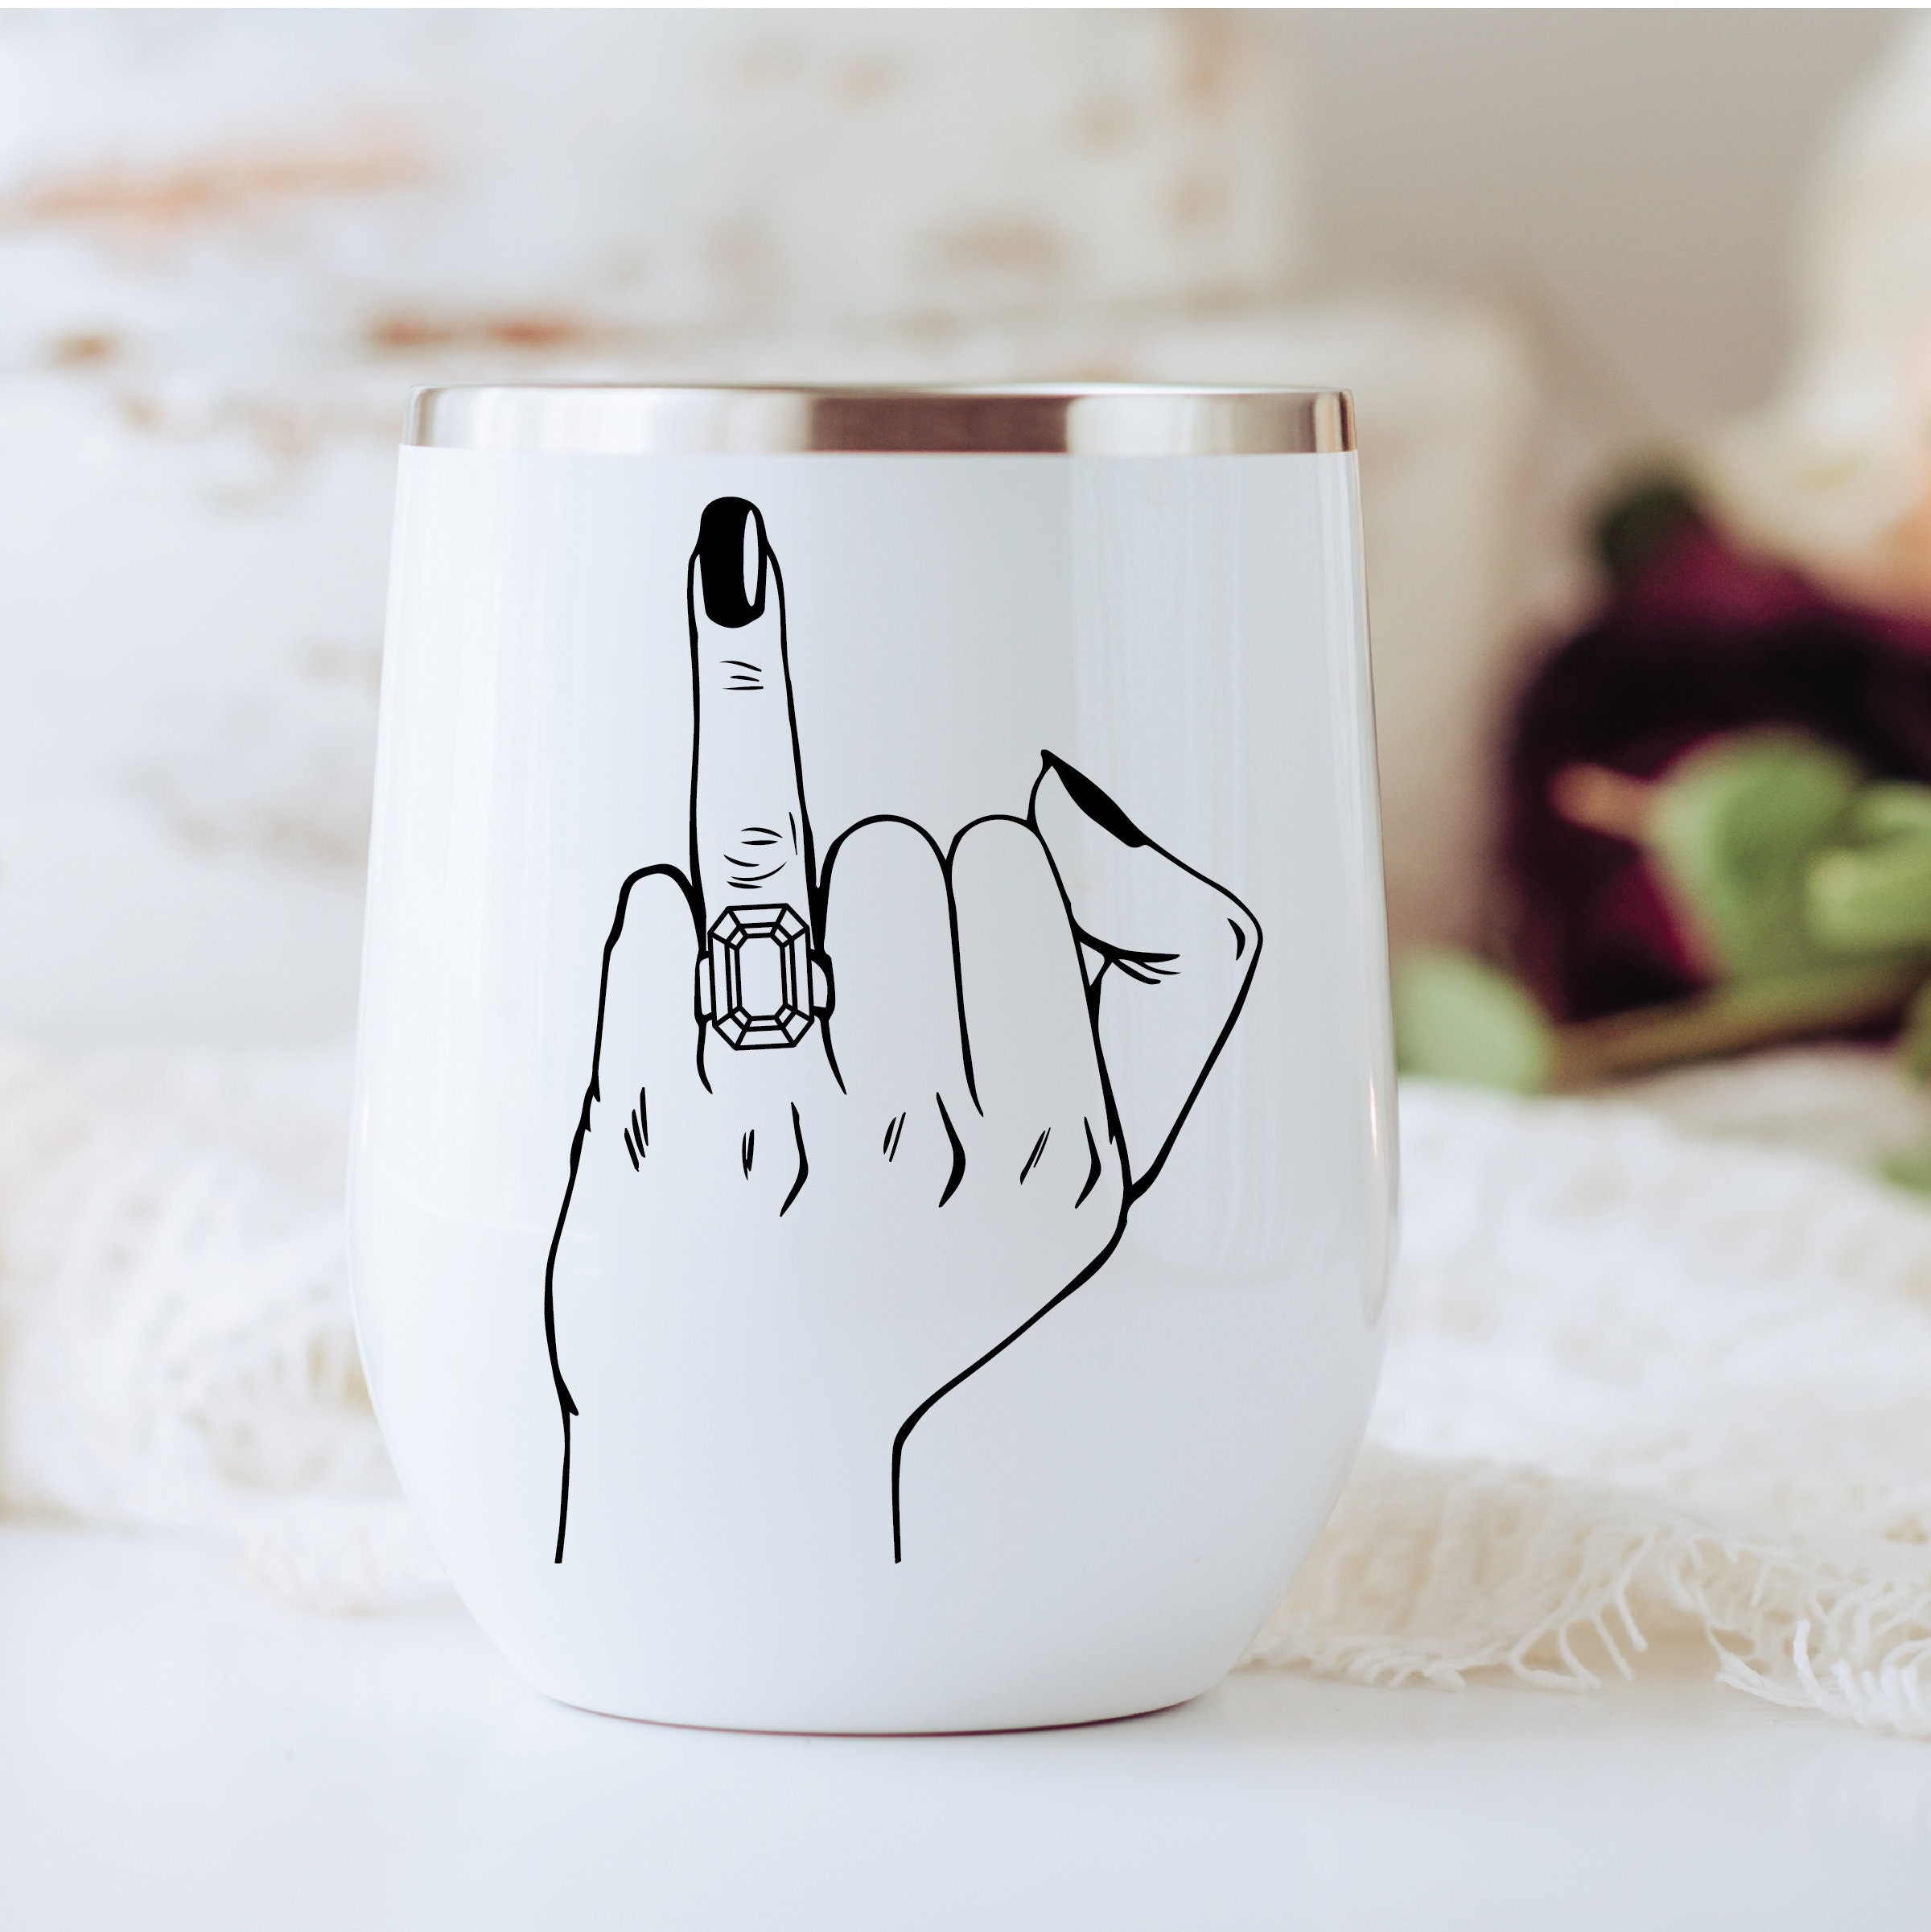 future mrs wine tumbler engaged wine tumbl stainless wine tumbler Mrs ring finger mrs wine tumble wine glass ring finger cup